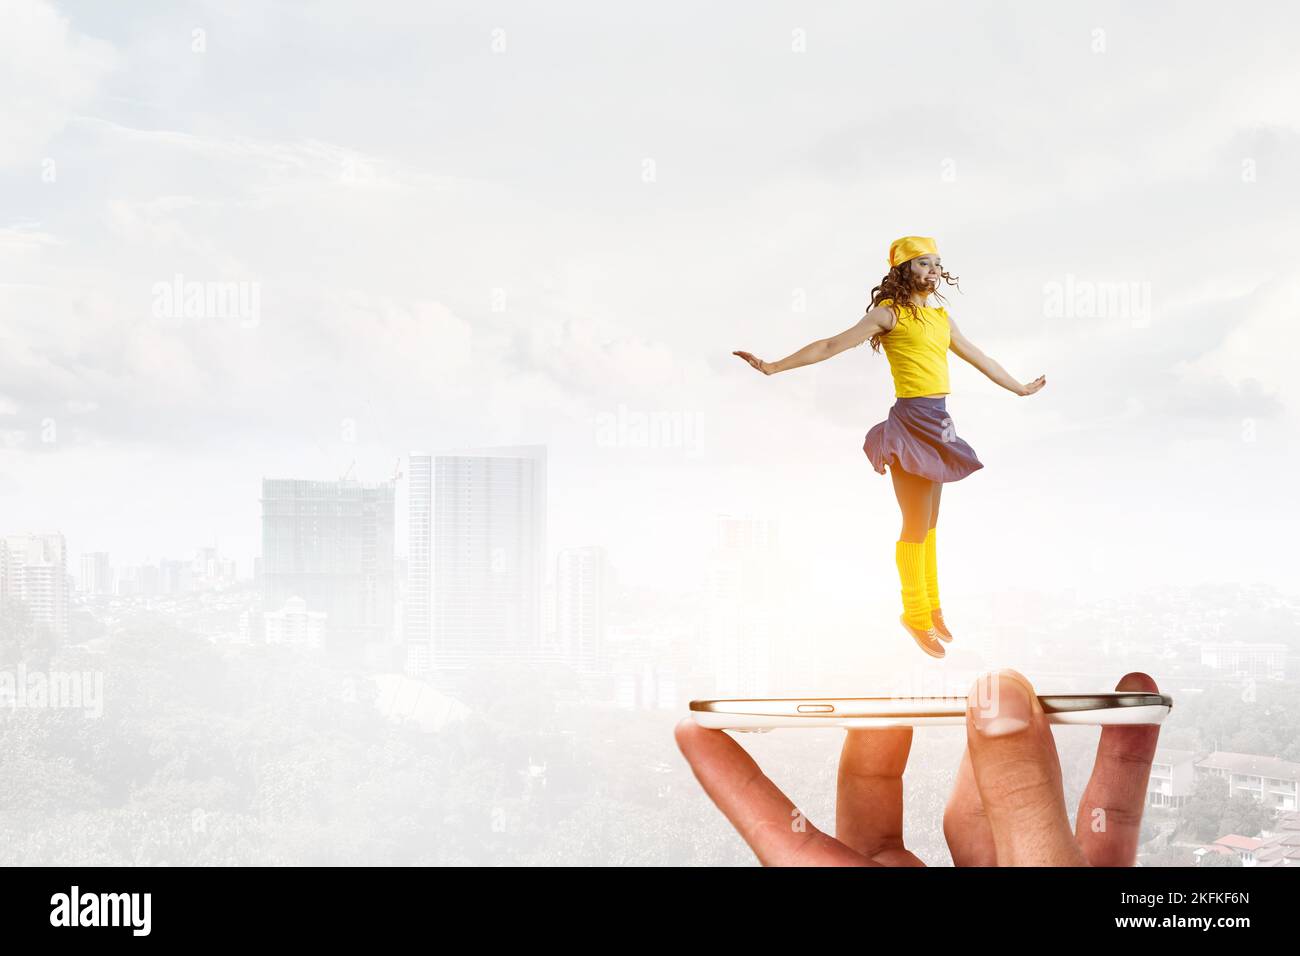 Young woman jumping in the air Stock Photo